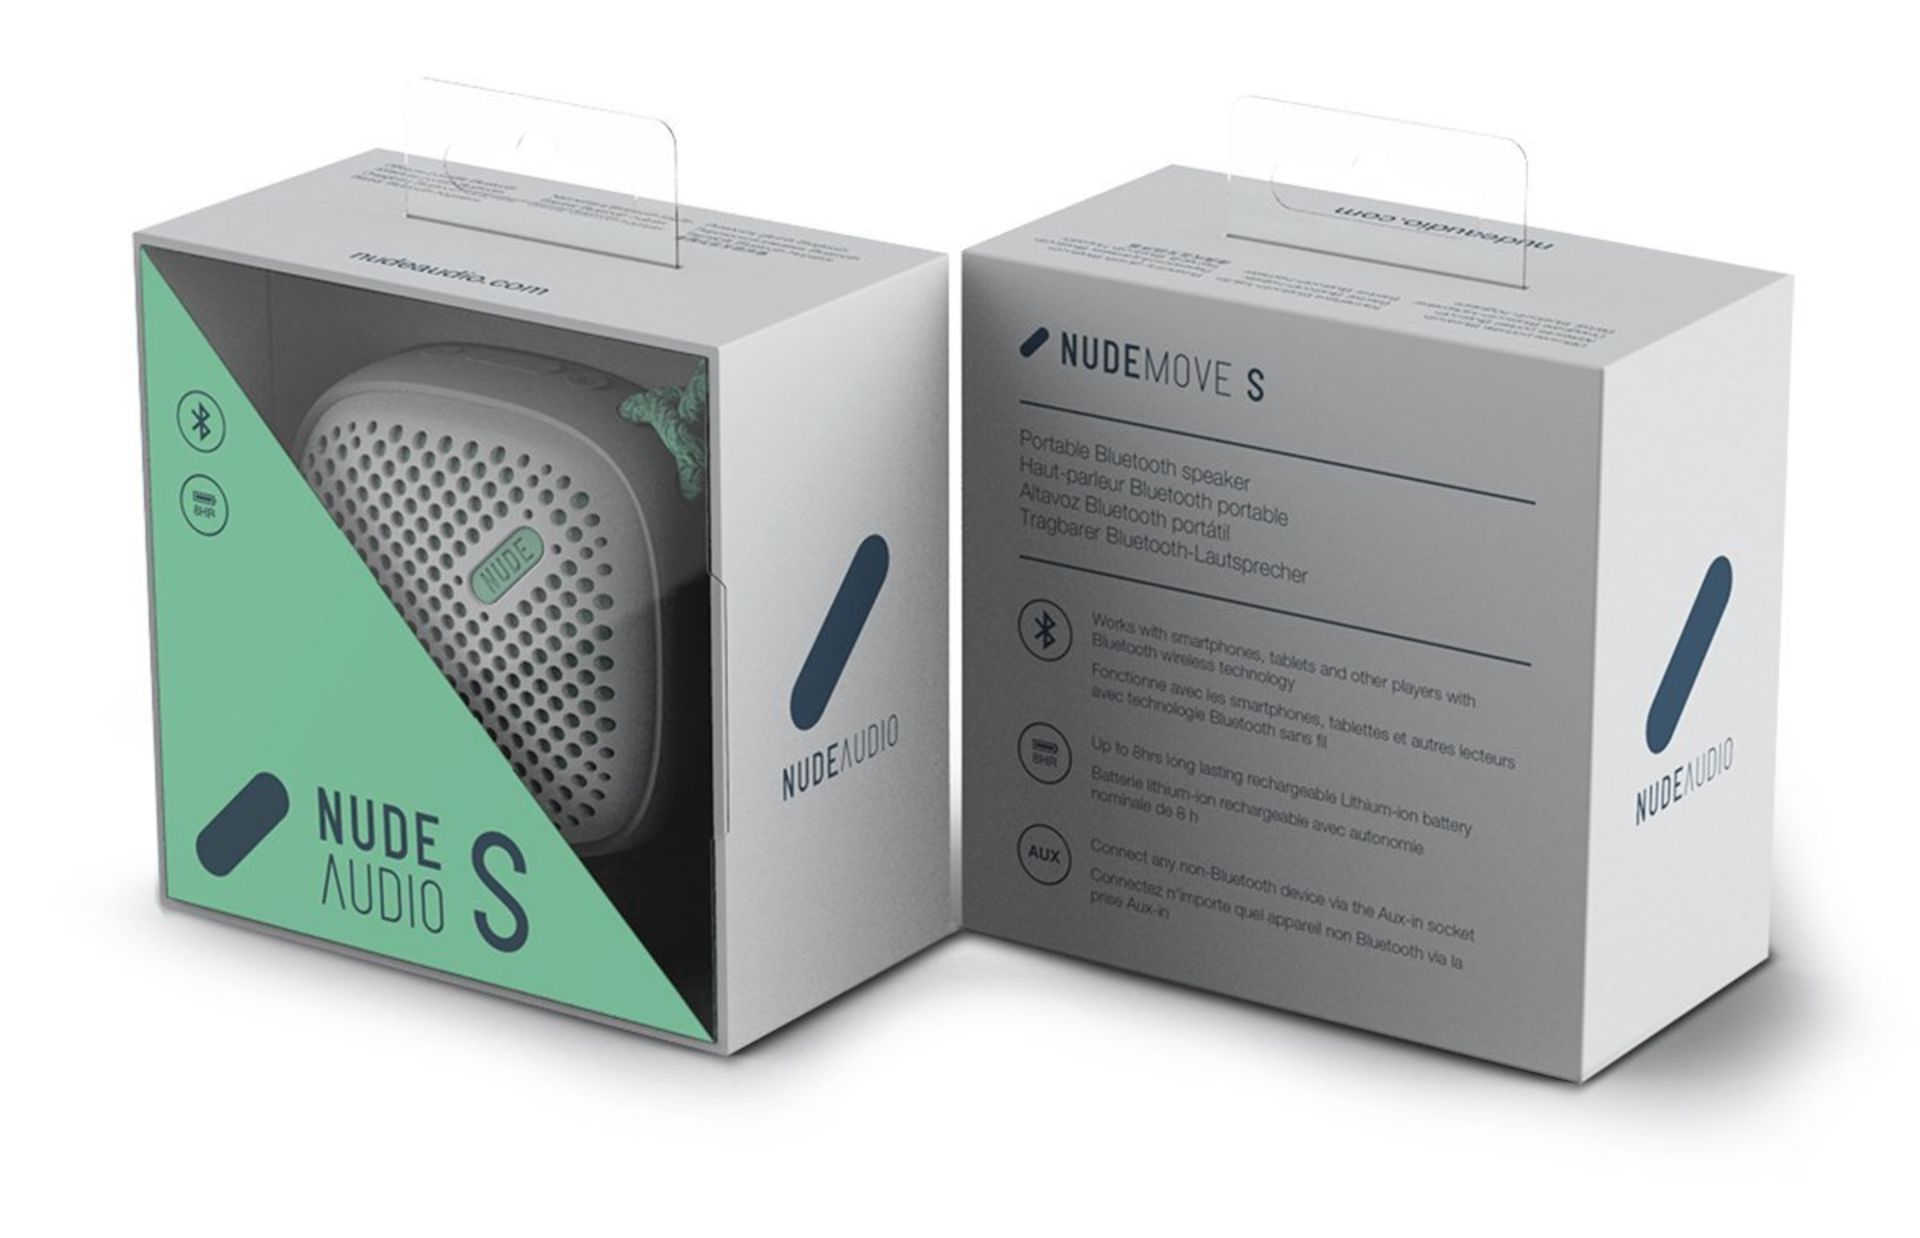 V Brand New Nude Audio Move S Bluetooth Speaker Grey/Green With 8hr Battery Life And AUX Socket - Image 2 of 2